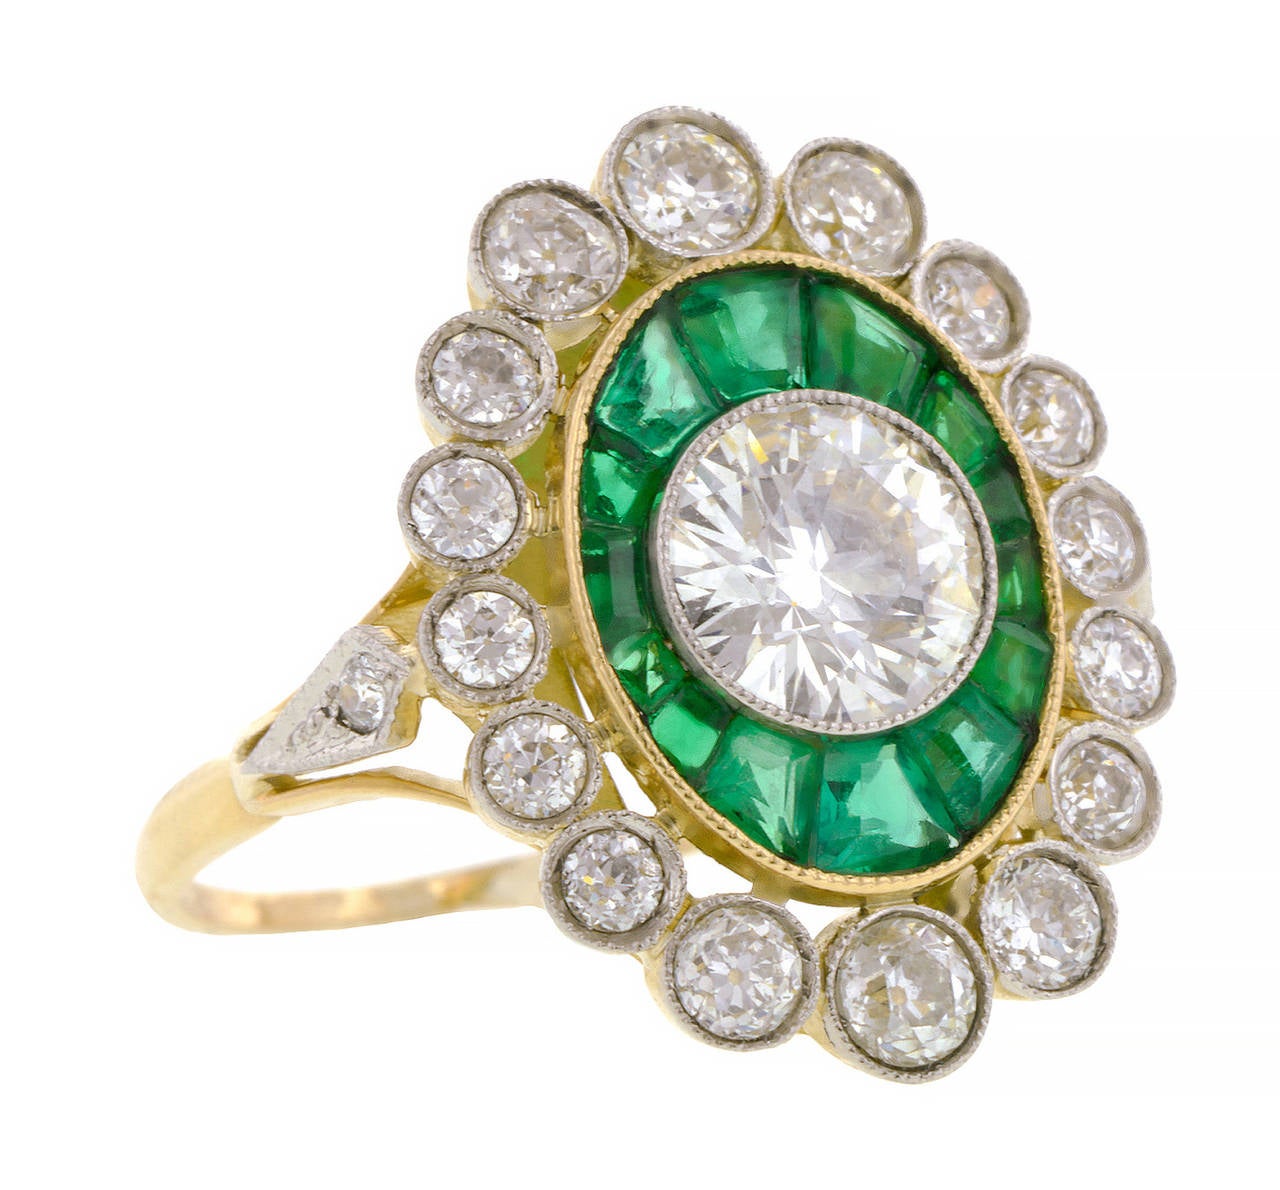 Diamond & Emerald Frame Ring centering a Transitional Round Brilliant cut diamond weighing app. 1.03ct. (G-H color, VS2 clarity), framed by calibre cut emeralds measuring app. 1.5 - 2.5 x 3.0mm. and an outer frame of bezel set Old European cut